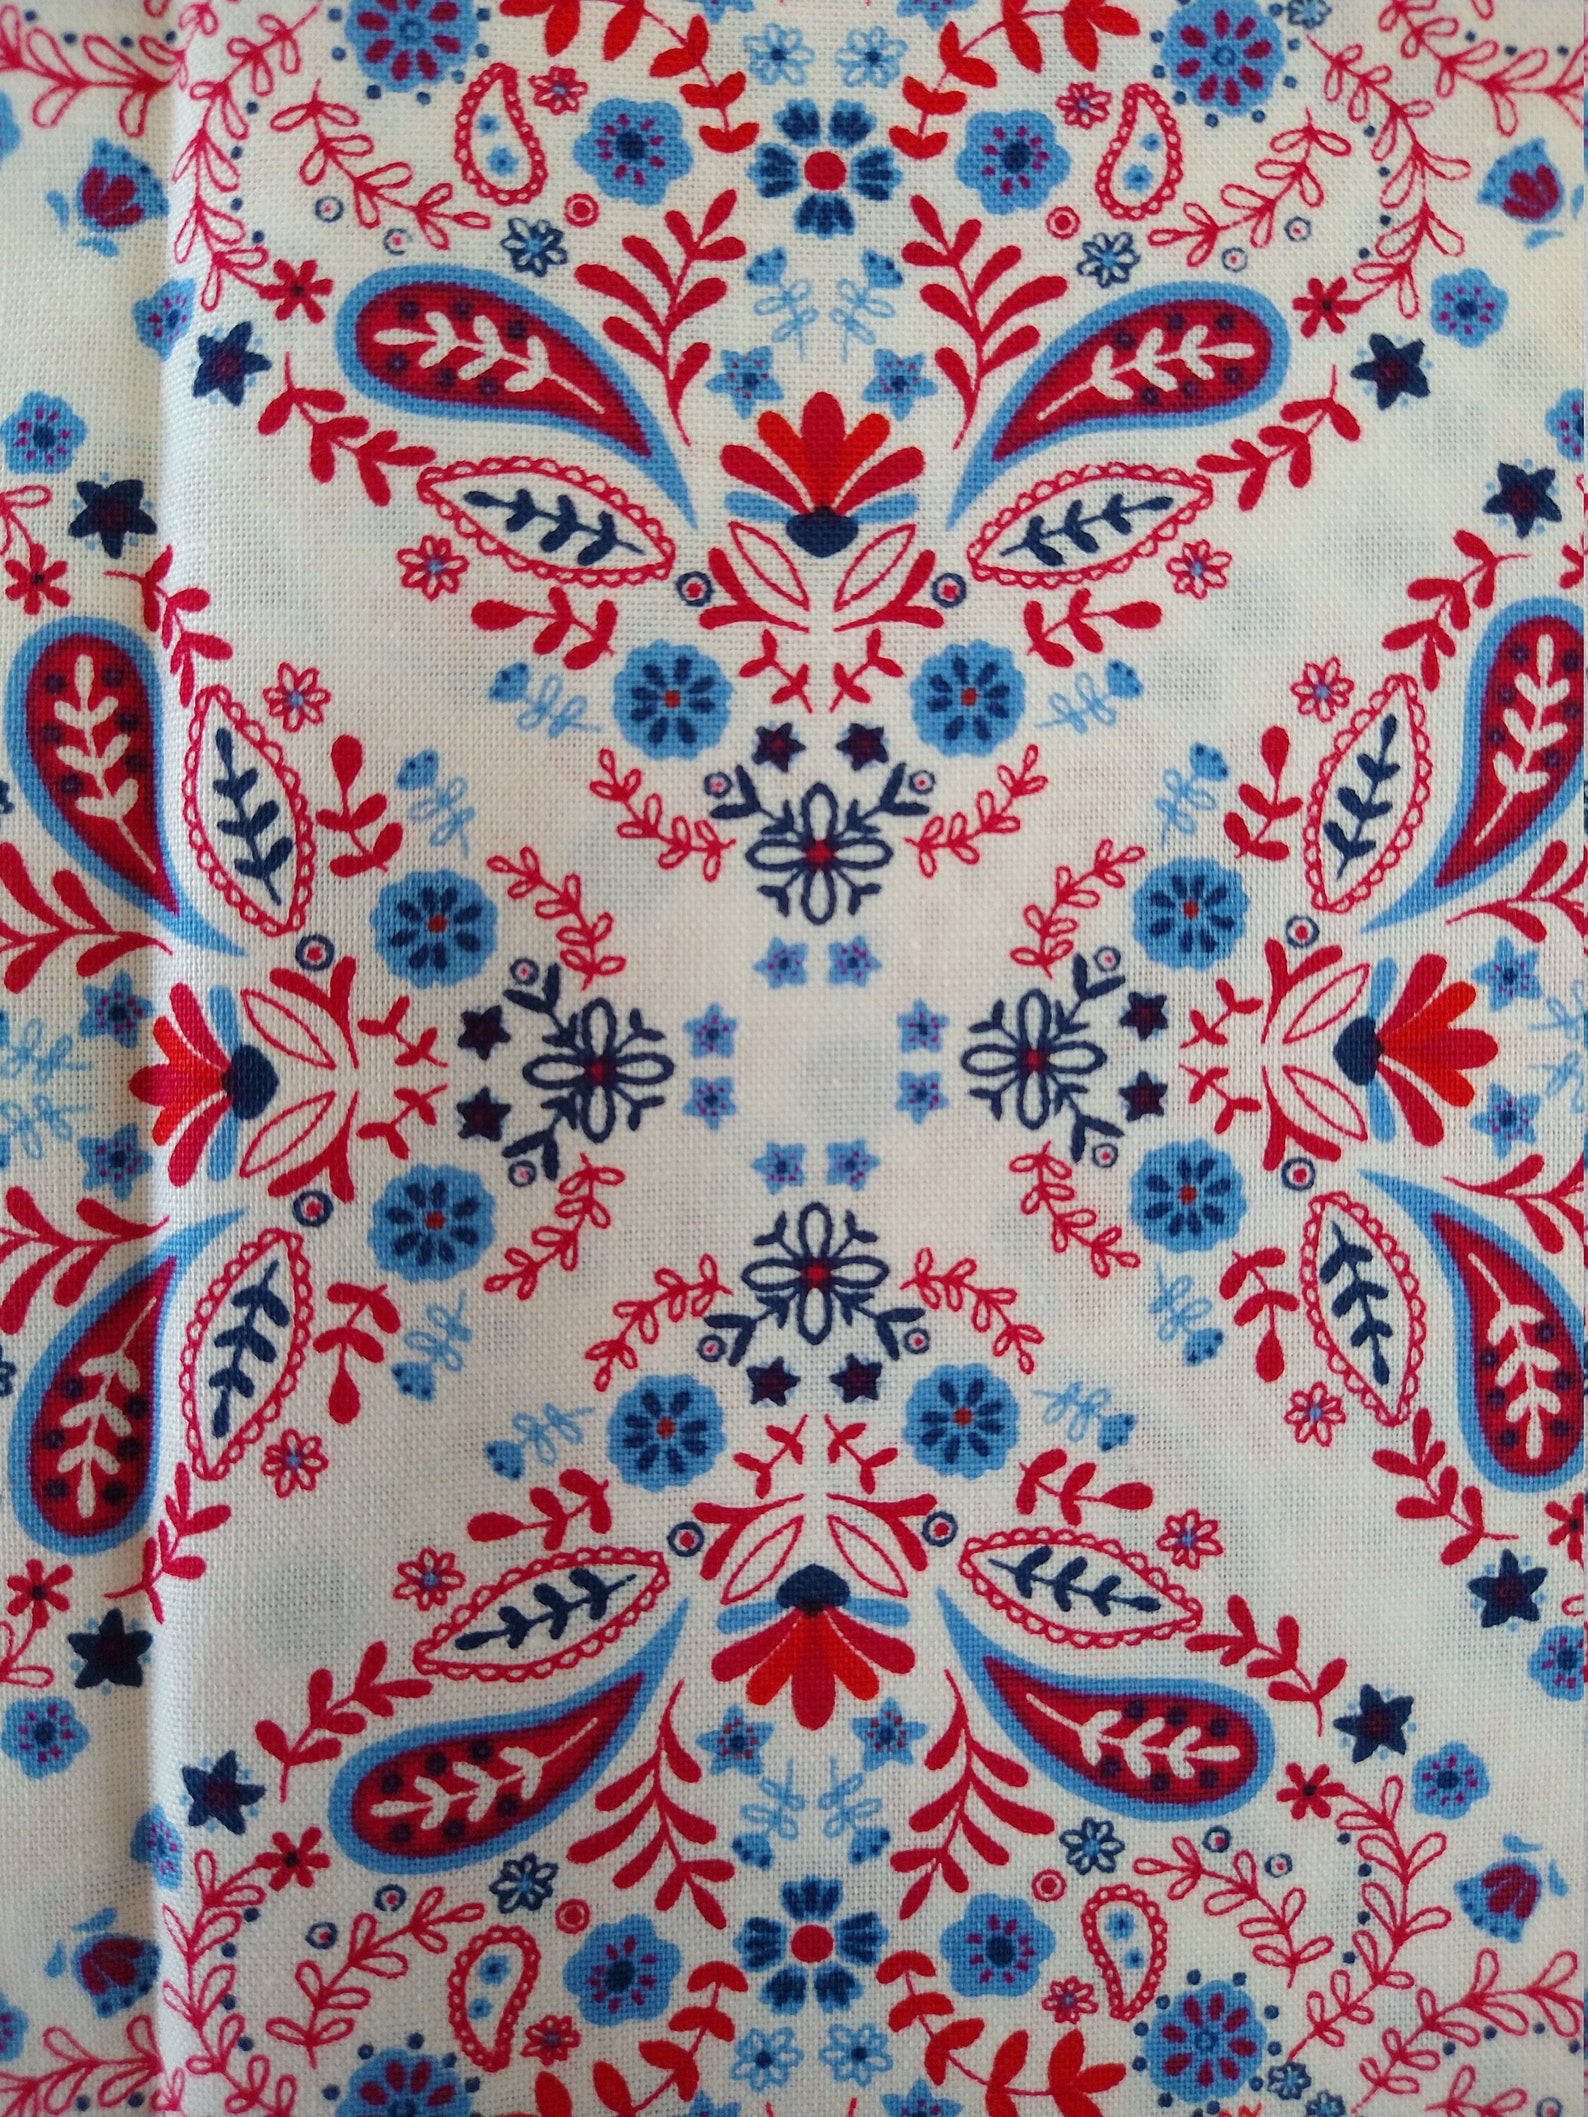 Red White blue fabric Fourth July Theme 100% Cotton - Etsy